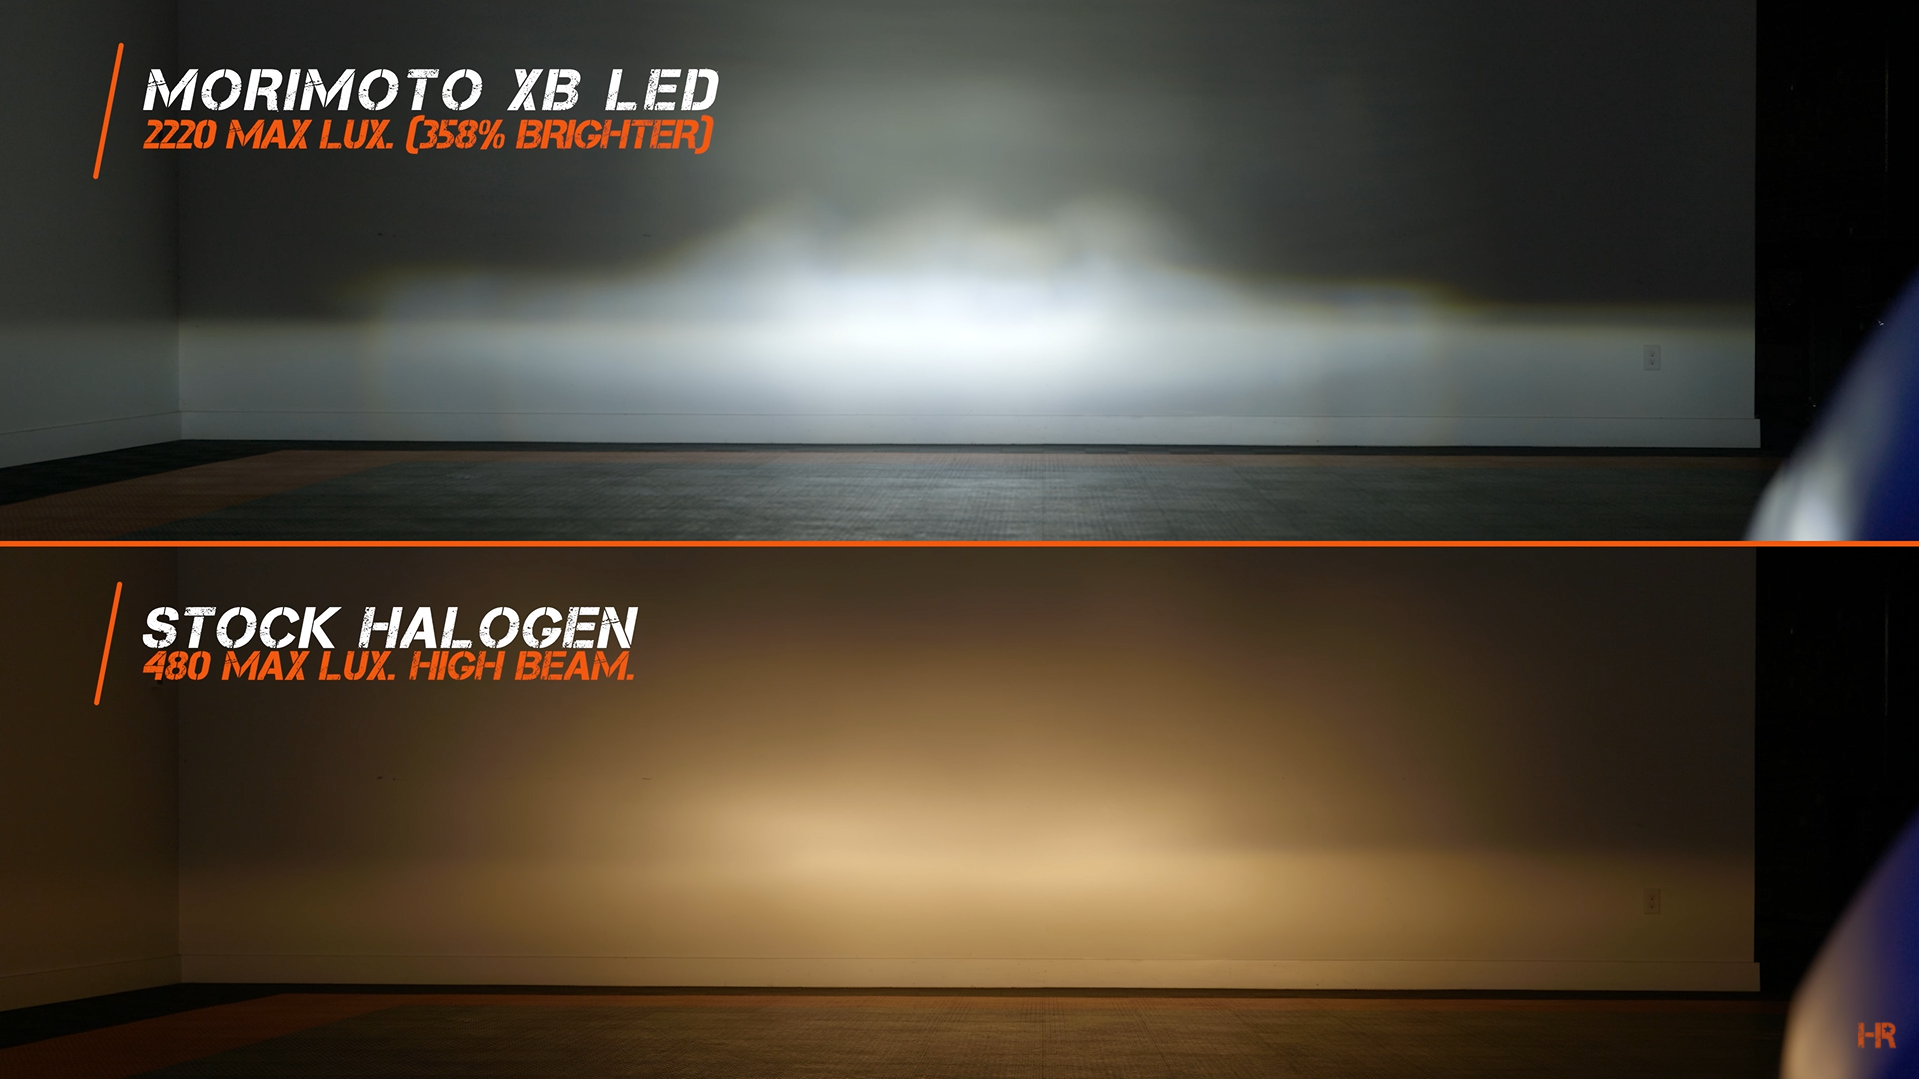 Comparison between the stock halogen and Morimoto XB LED headlight on high beam.